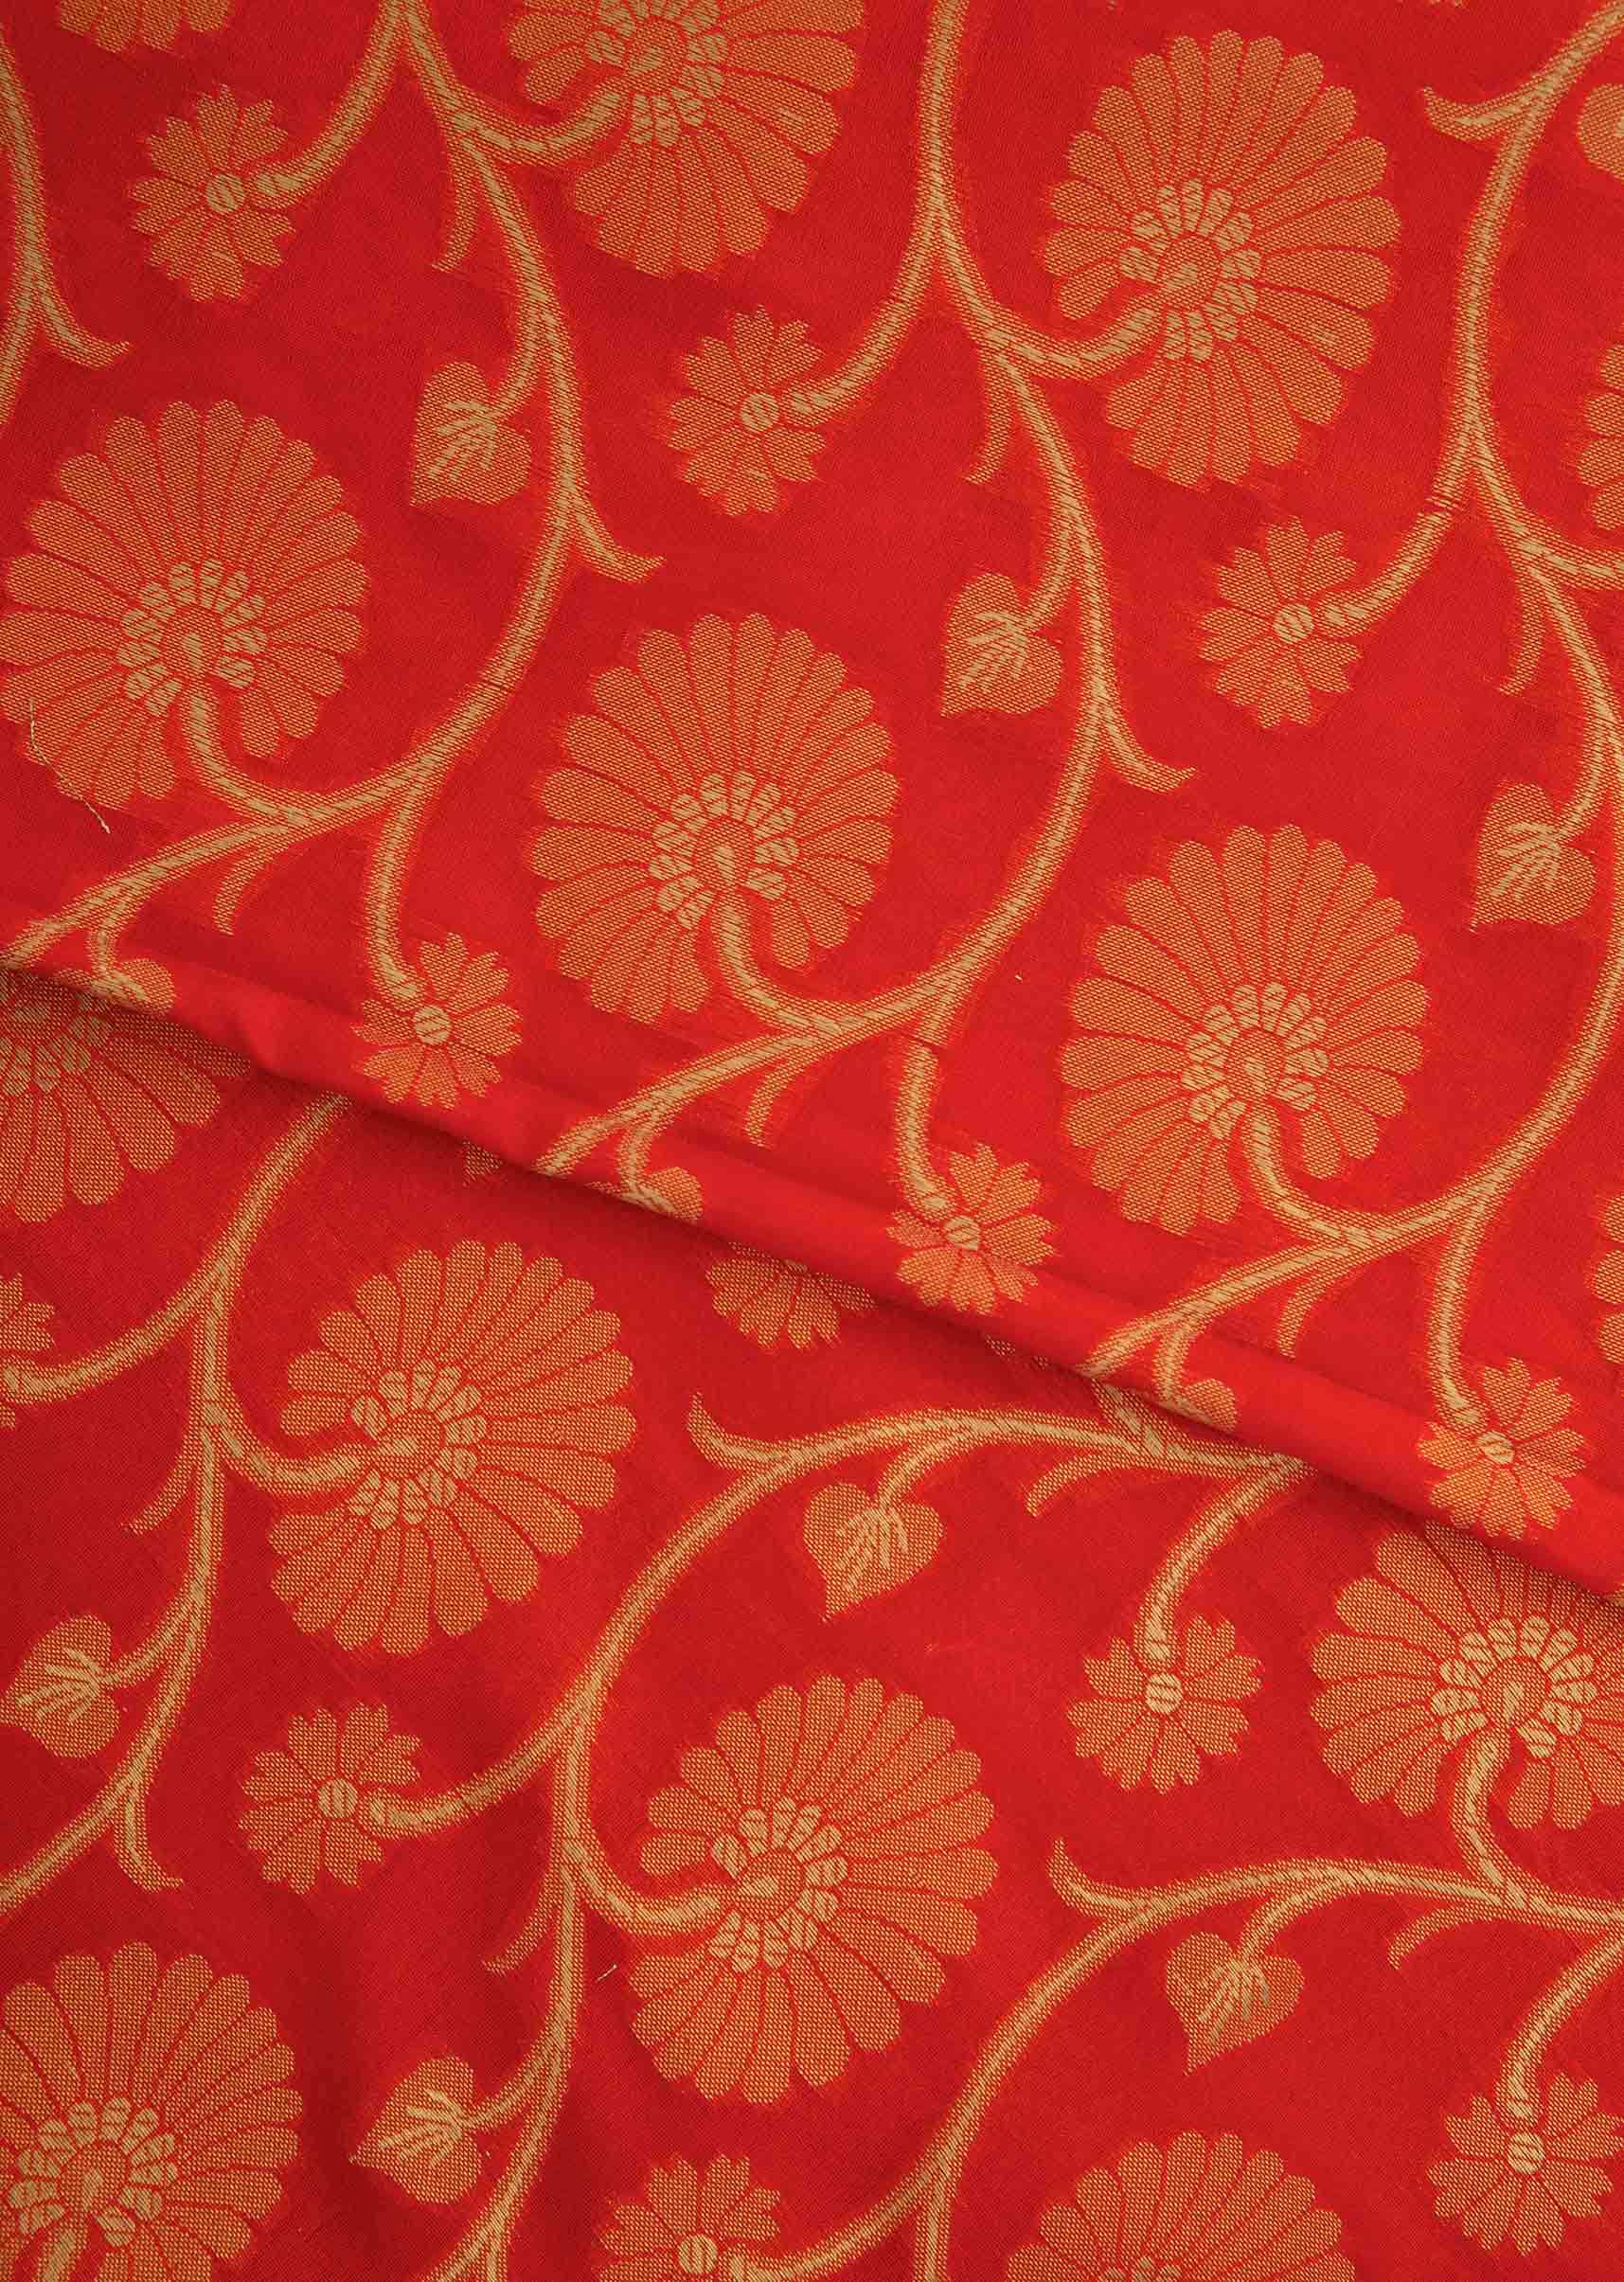 Coral red saree in chanderi silk with floral jaal weave all over